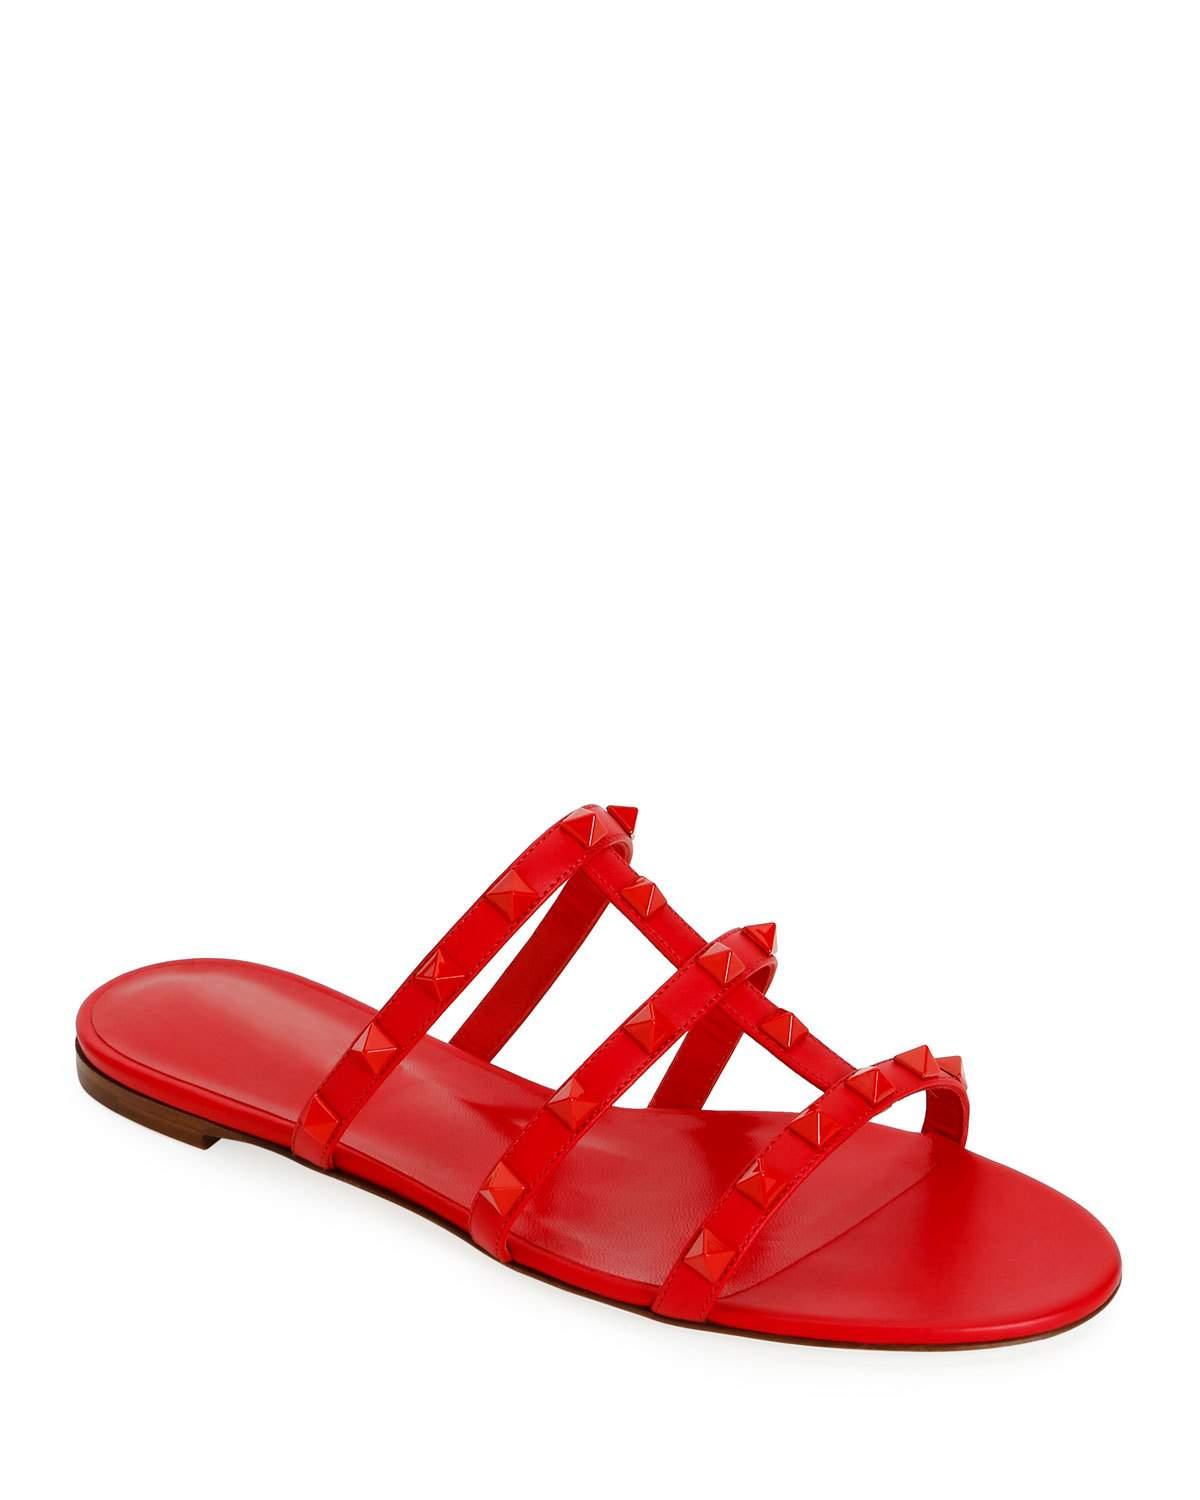 Valentino Tonal Rockstud Flat Leather Slide Sandals in Red - Lyst